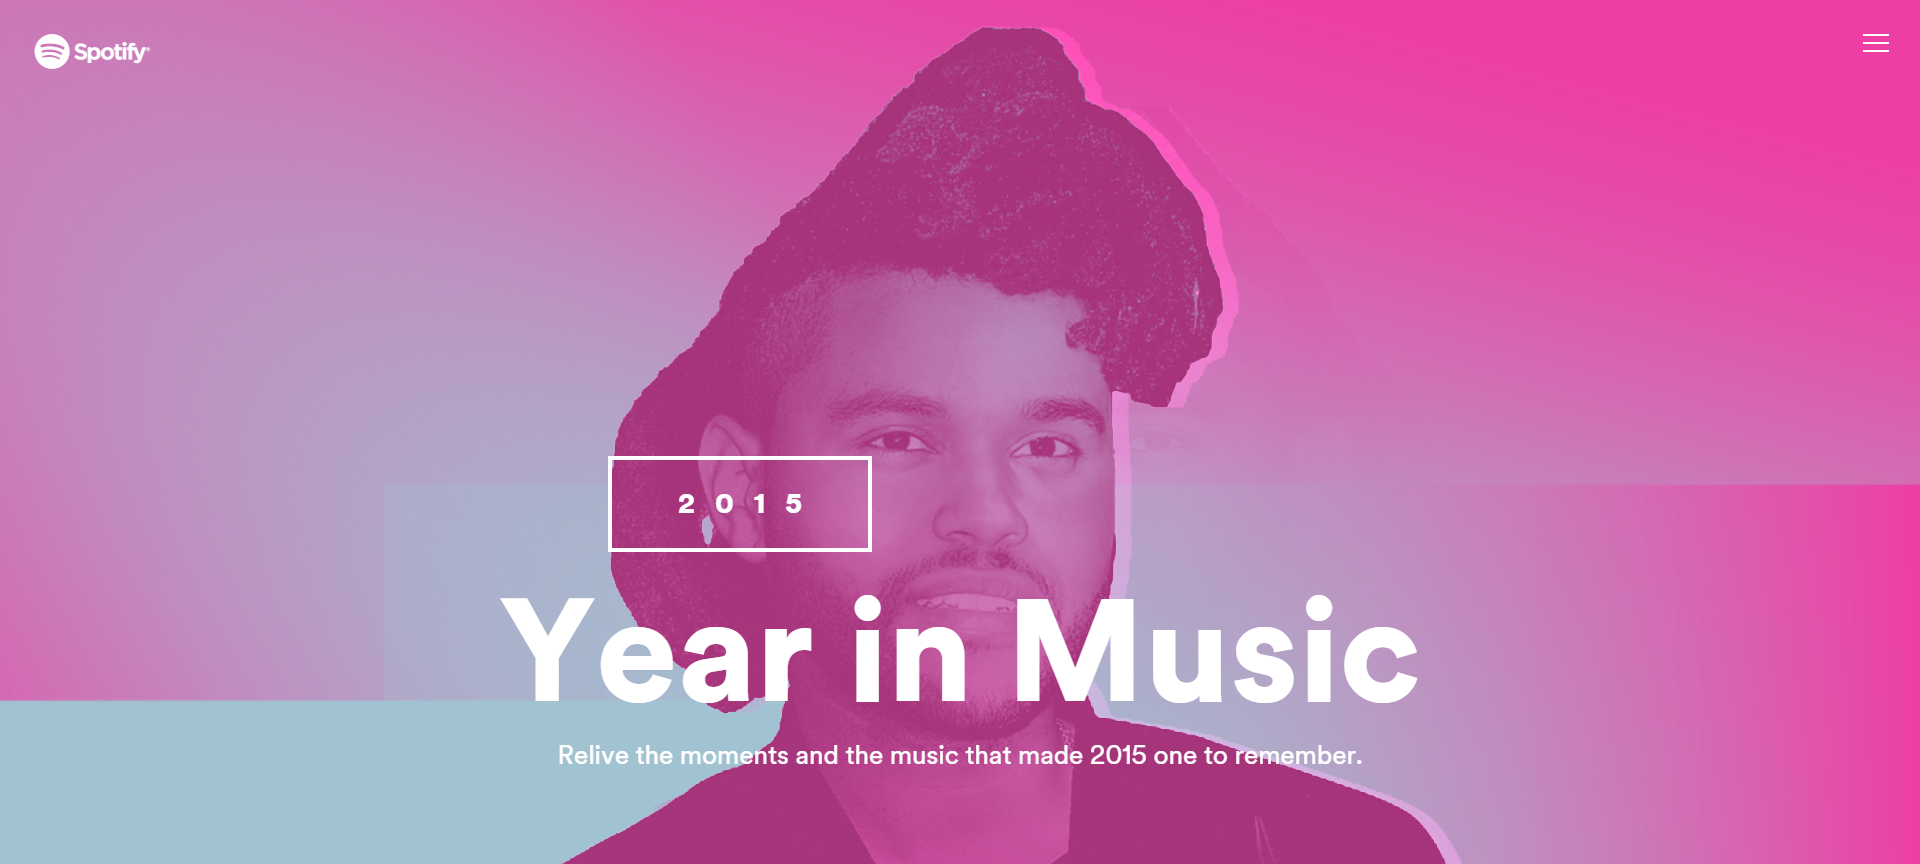 See Your Personal ‘Year in Music’ for 2015 with Spotify